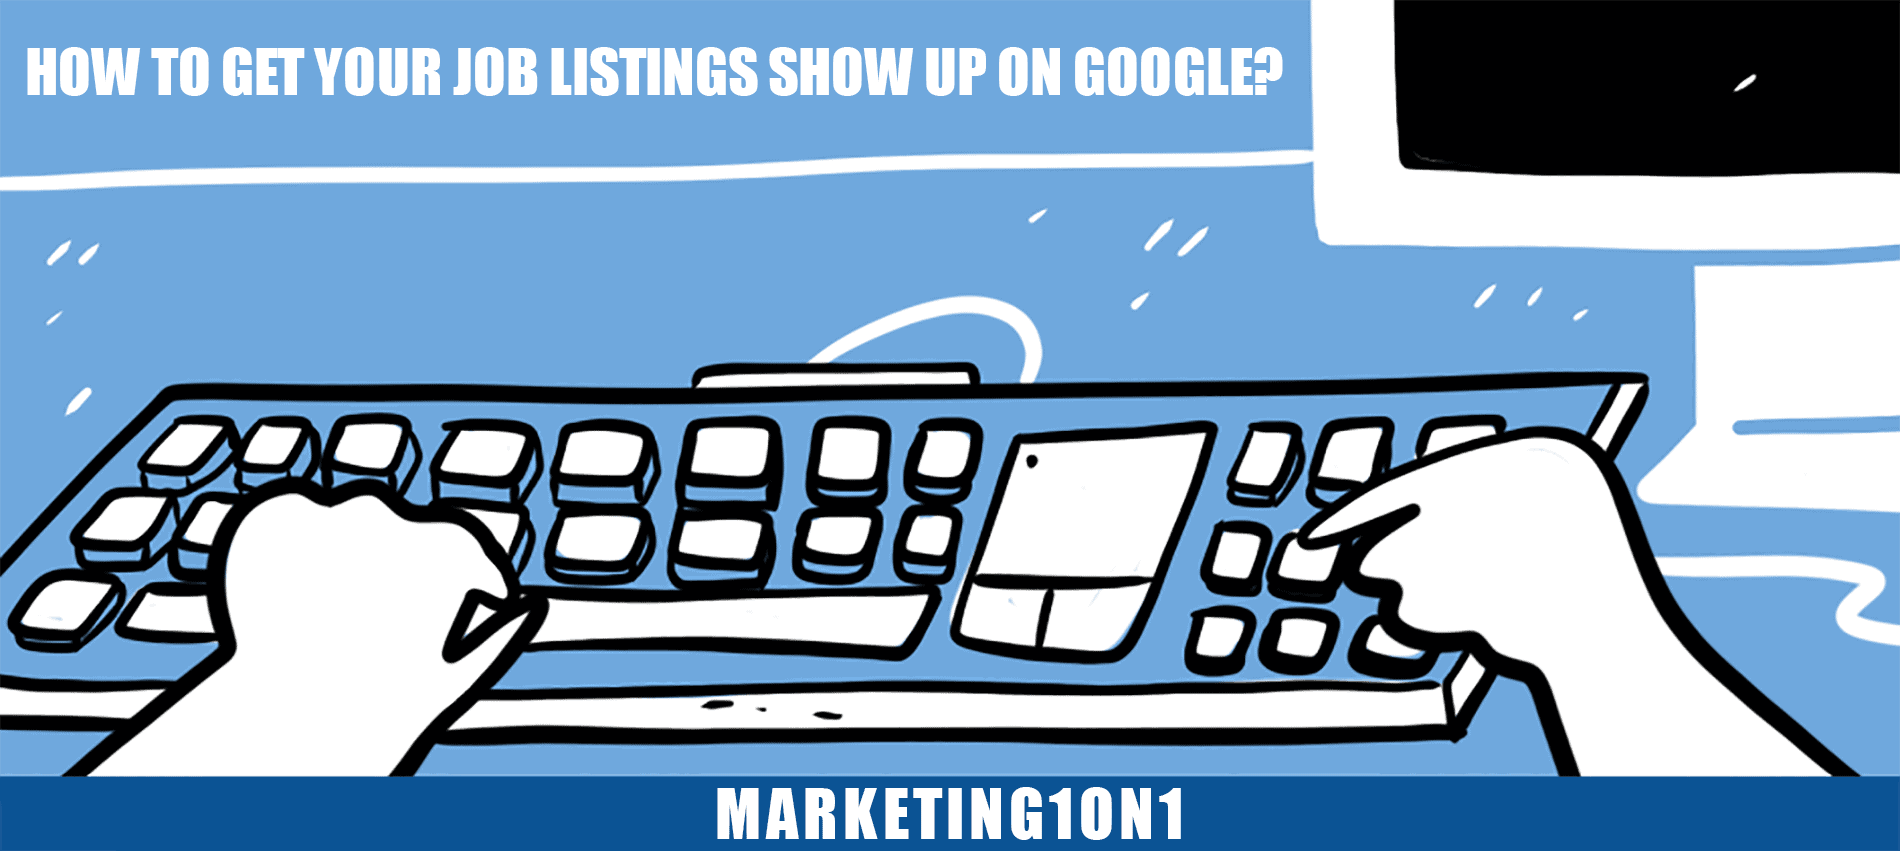 How to Get Your Job Listings Show Up on Google